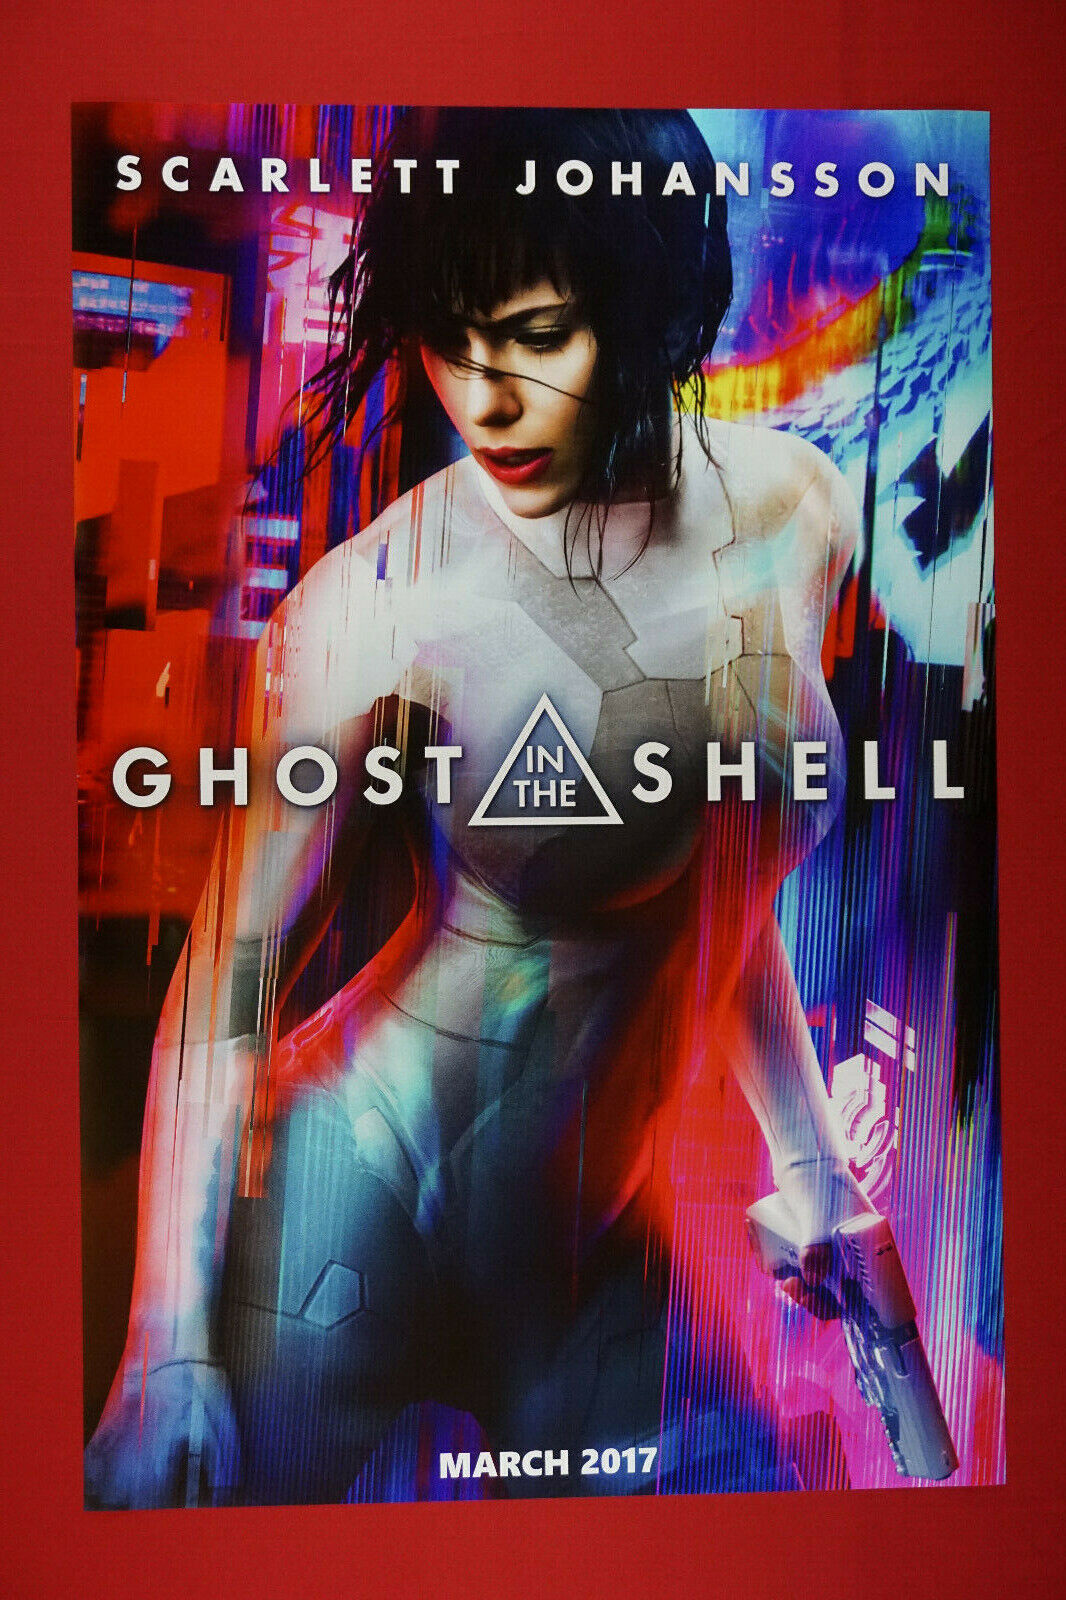 Ghost in the Shell 2017 Major Mira Cyborg Johansson Movie Poster 24X36 New  GS17